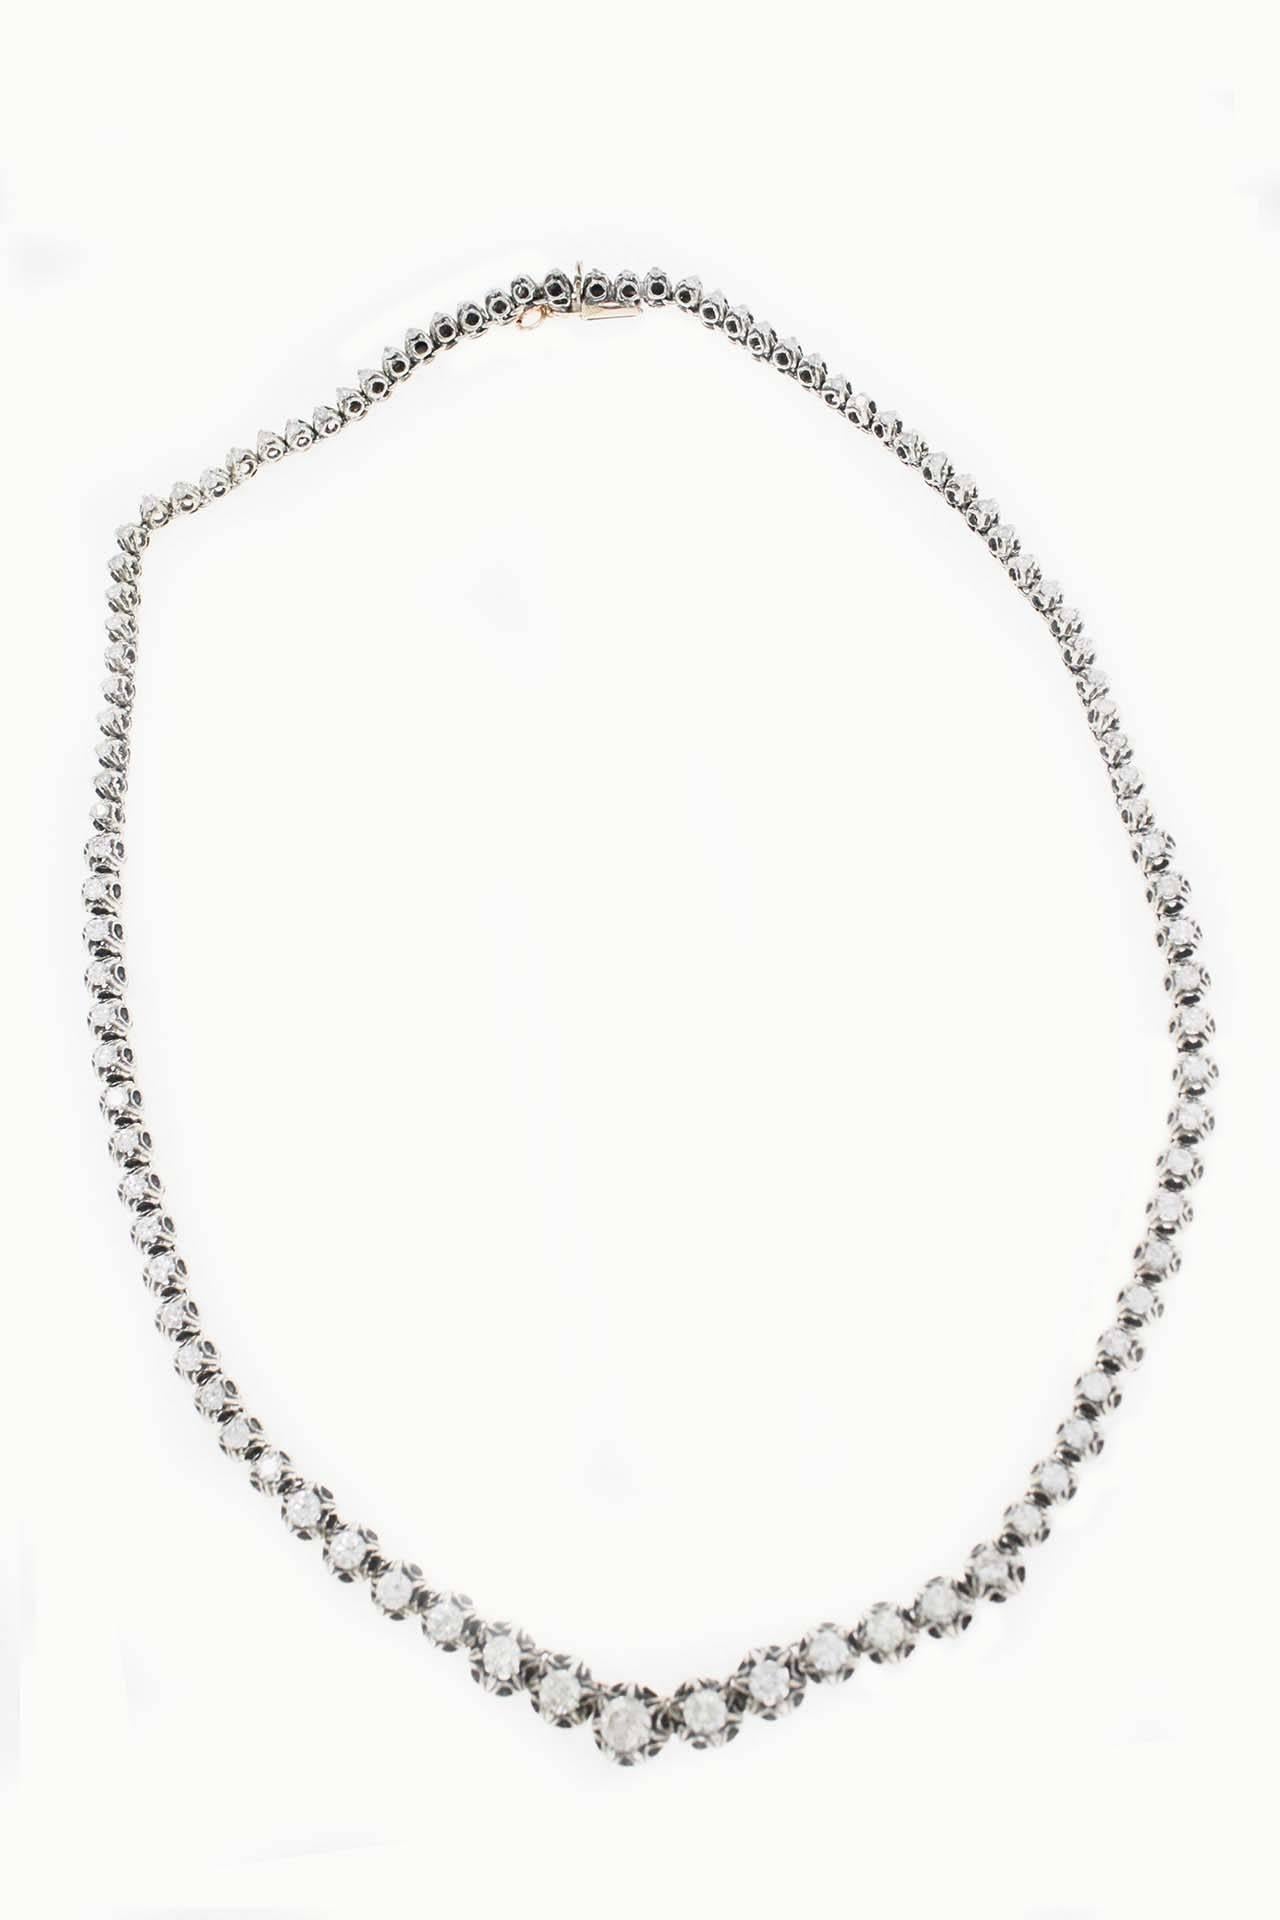 Women's Diamond Gold and Silver Choker Necklace